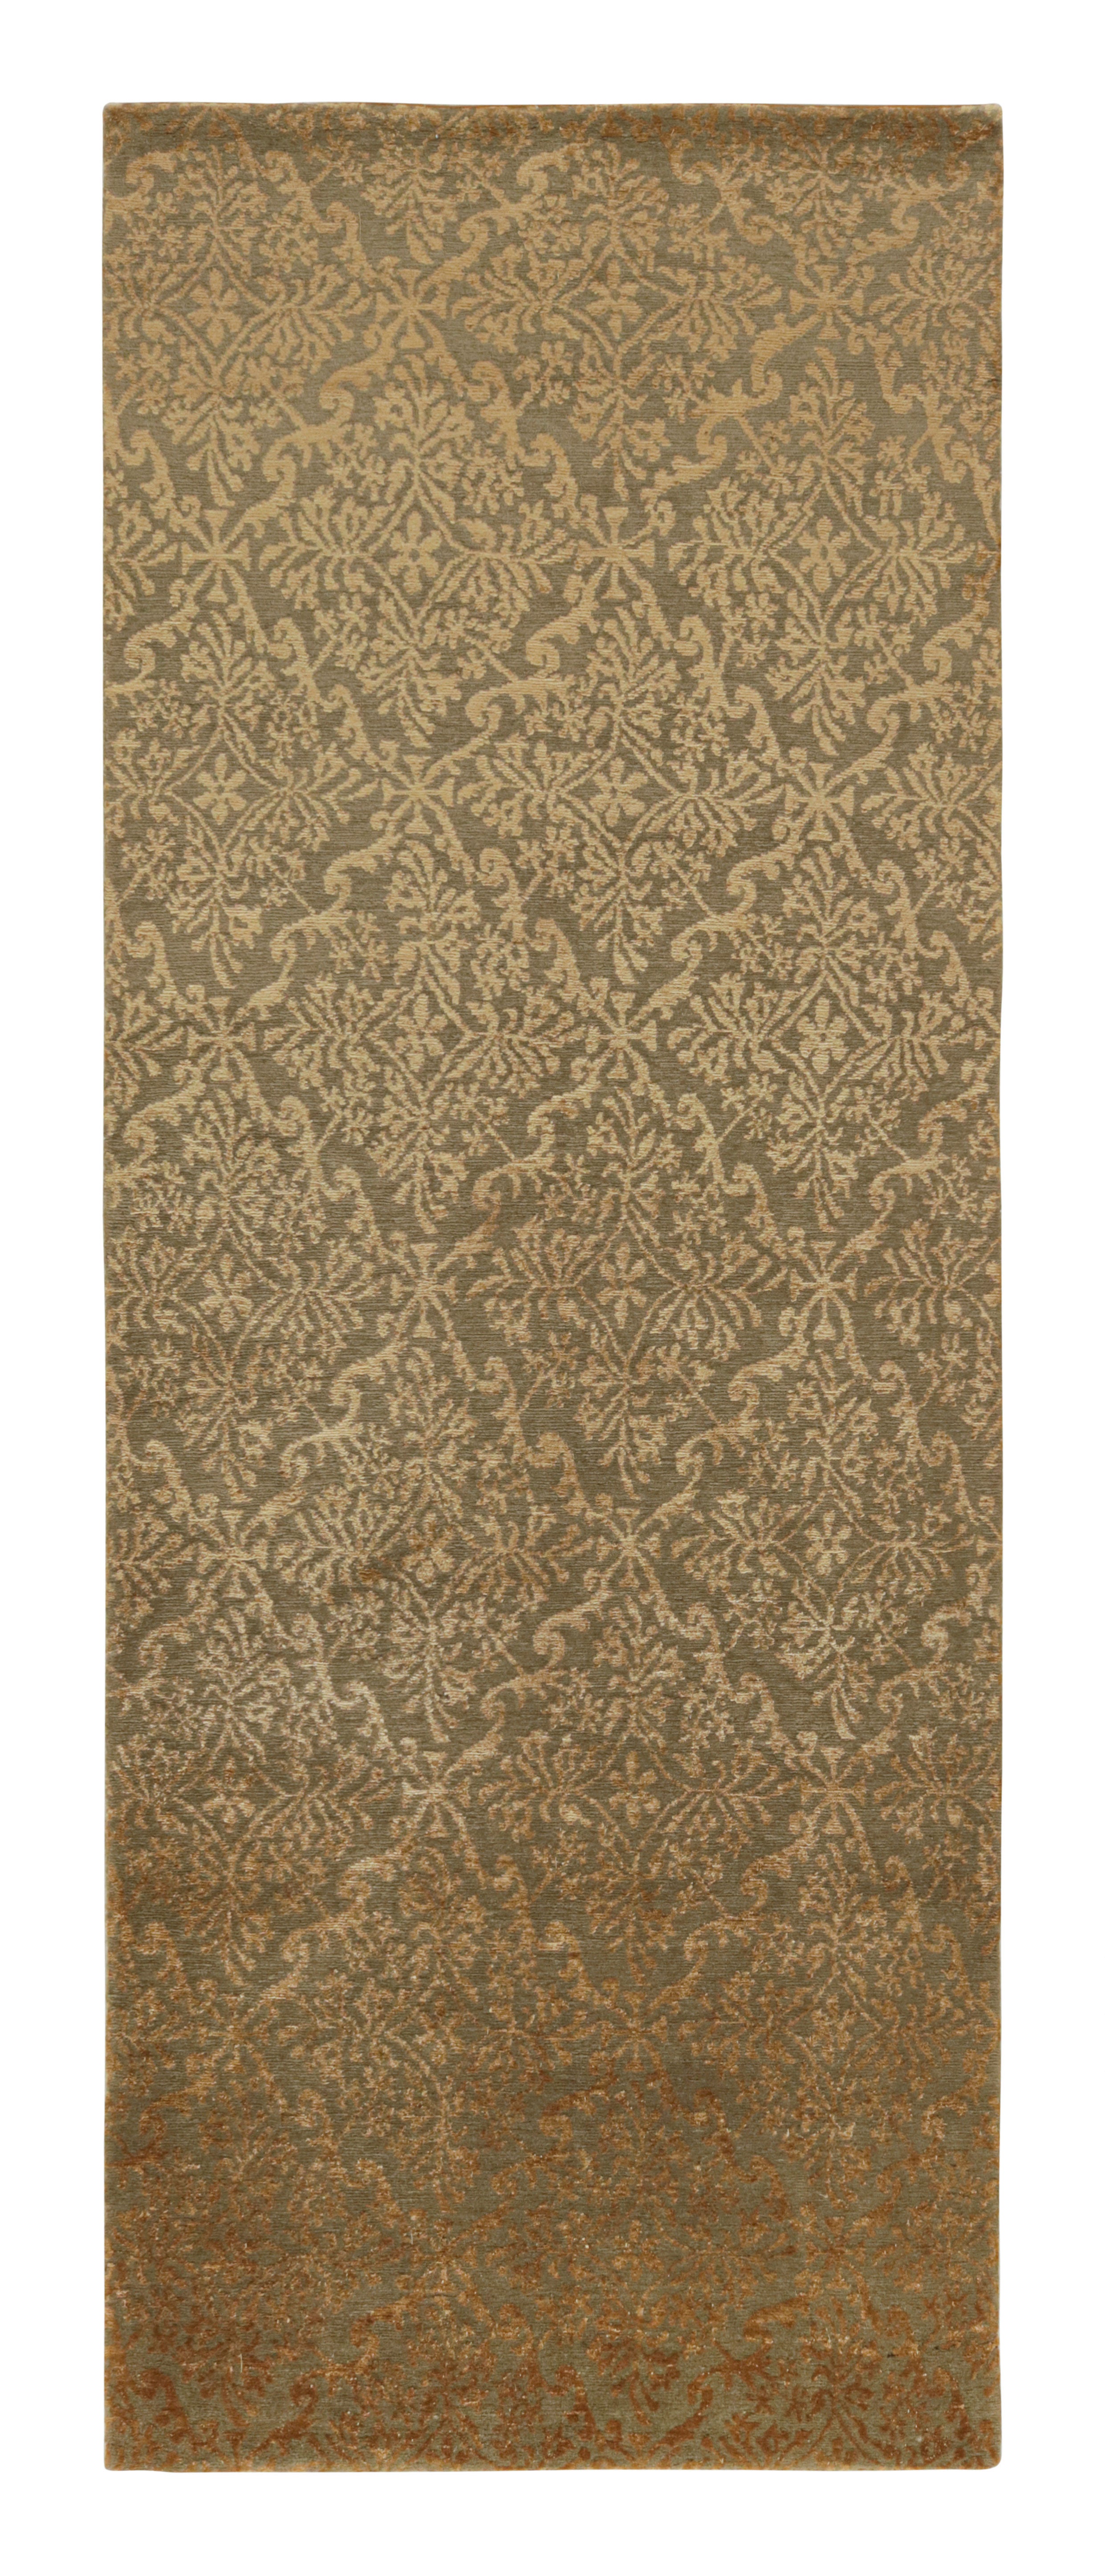 Rug & Kilim’s European Style Runner Rug in Brown and Gold Florals “Cordoba”